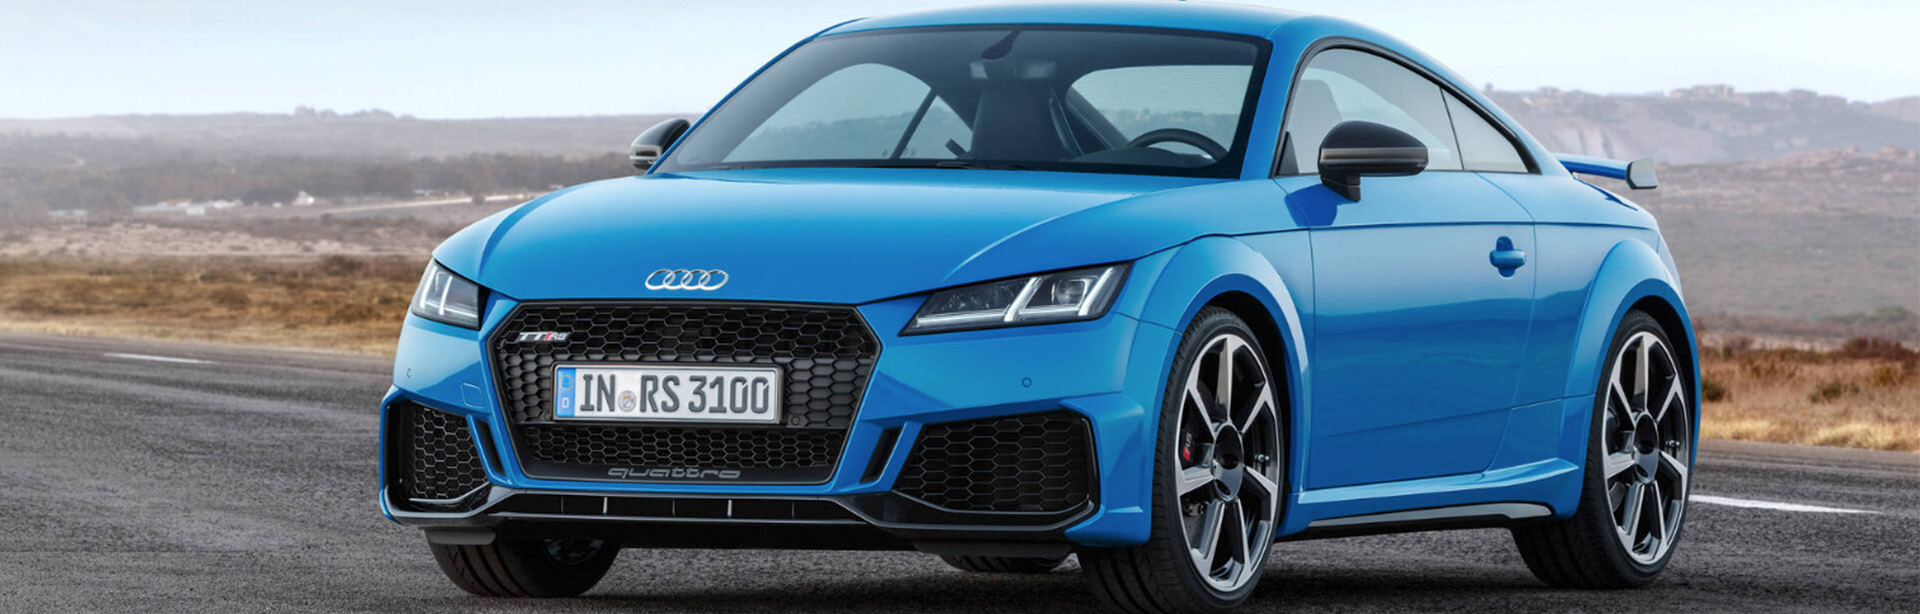 See the New Audi TT Coupe in Upper Saddle River, NJ | Features Review